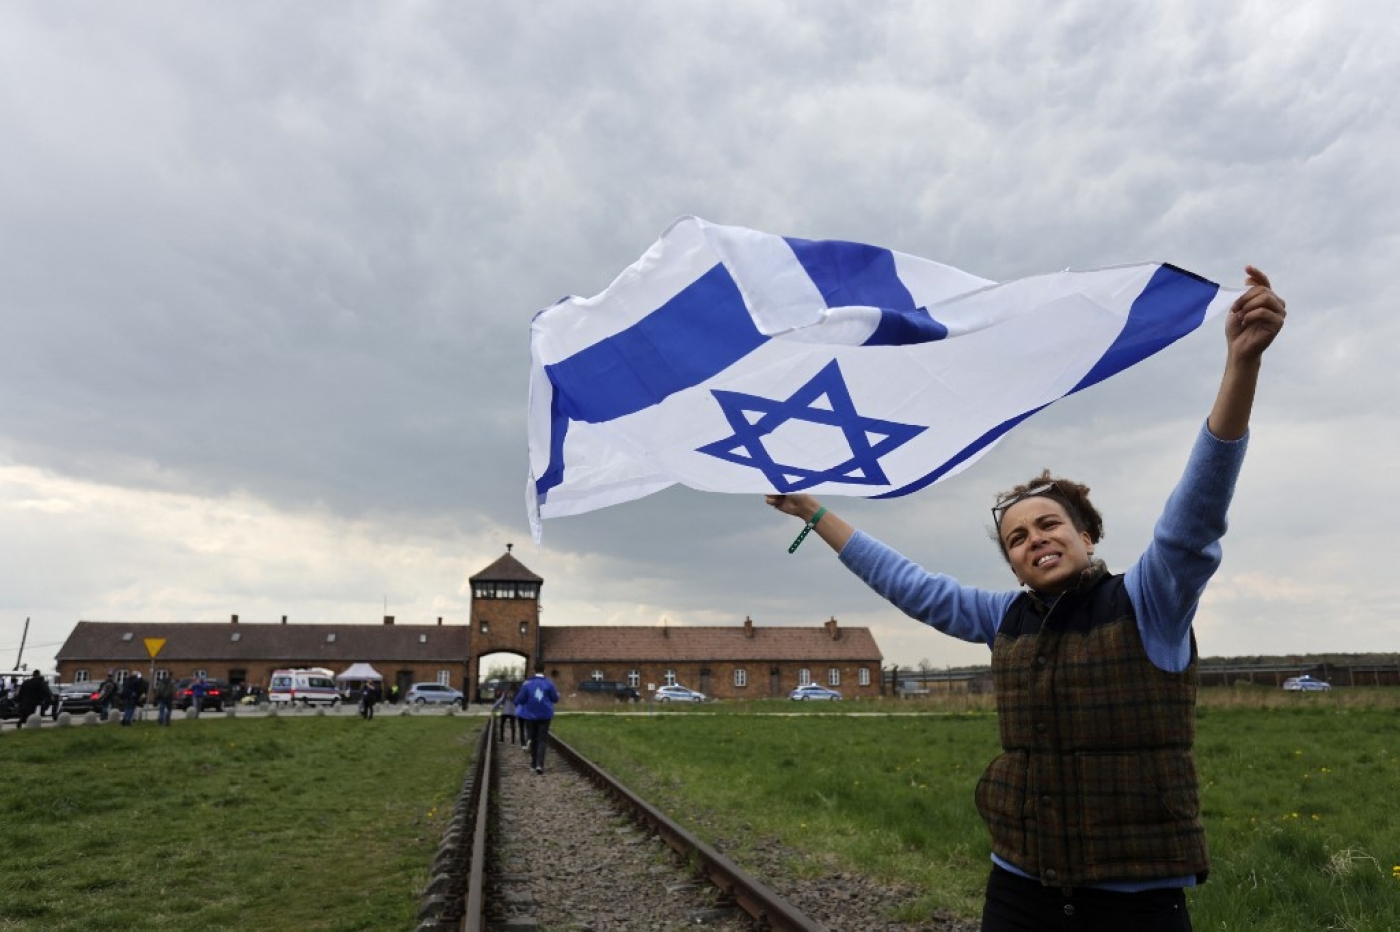 A participant holds up the Israeli flag at The March of the Living at the site of the former Auschwitz-Birkenau camp in Poland to honour the victims of the Holocaust, 28 April 2022 (AFP)